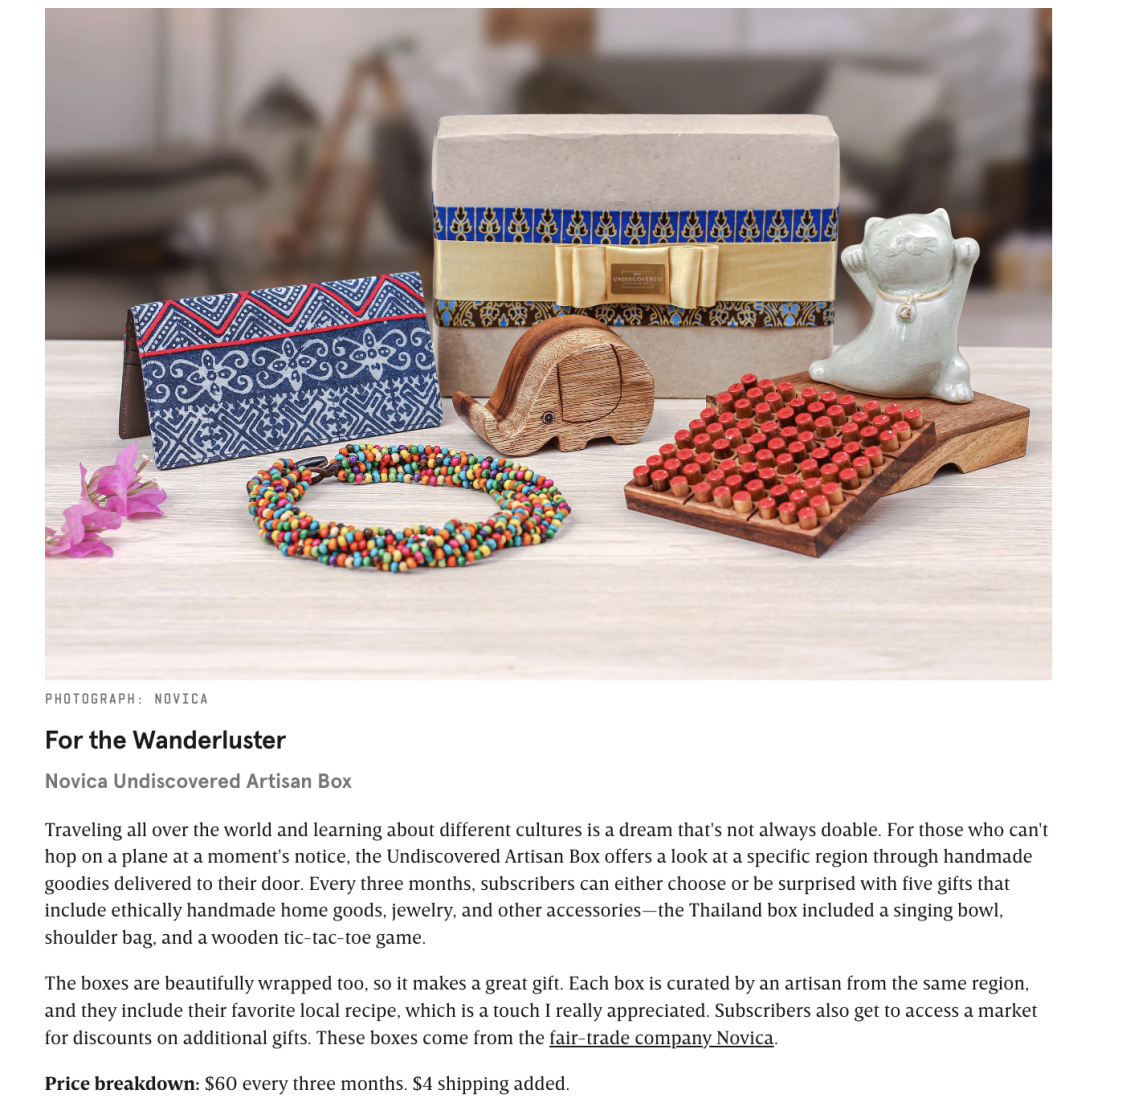 WIRED Magazine recommends Novica’s Undiscovered Artisan Box